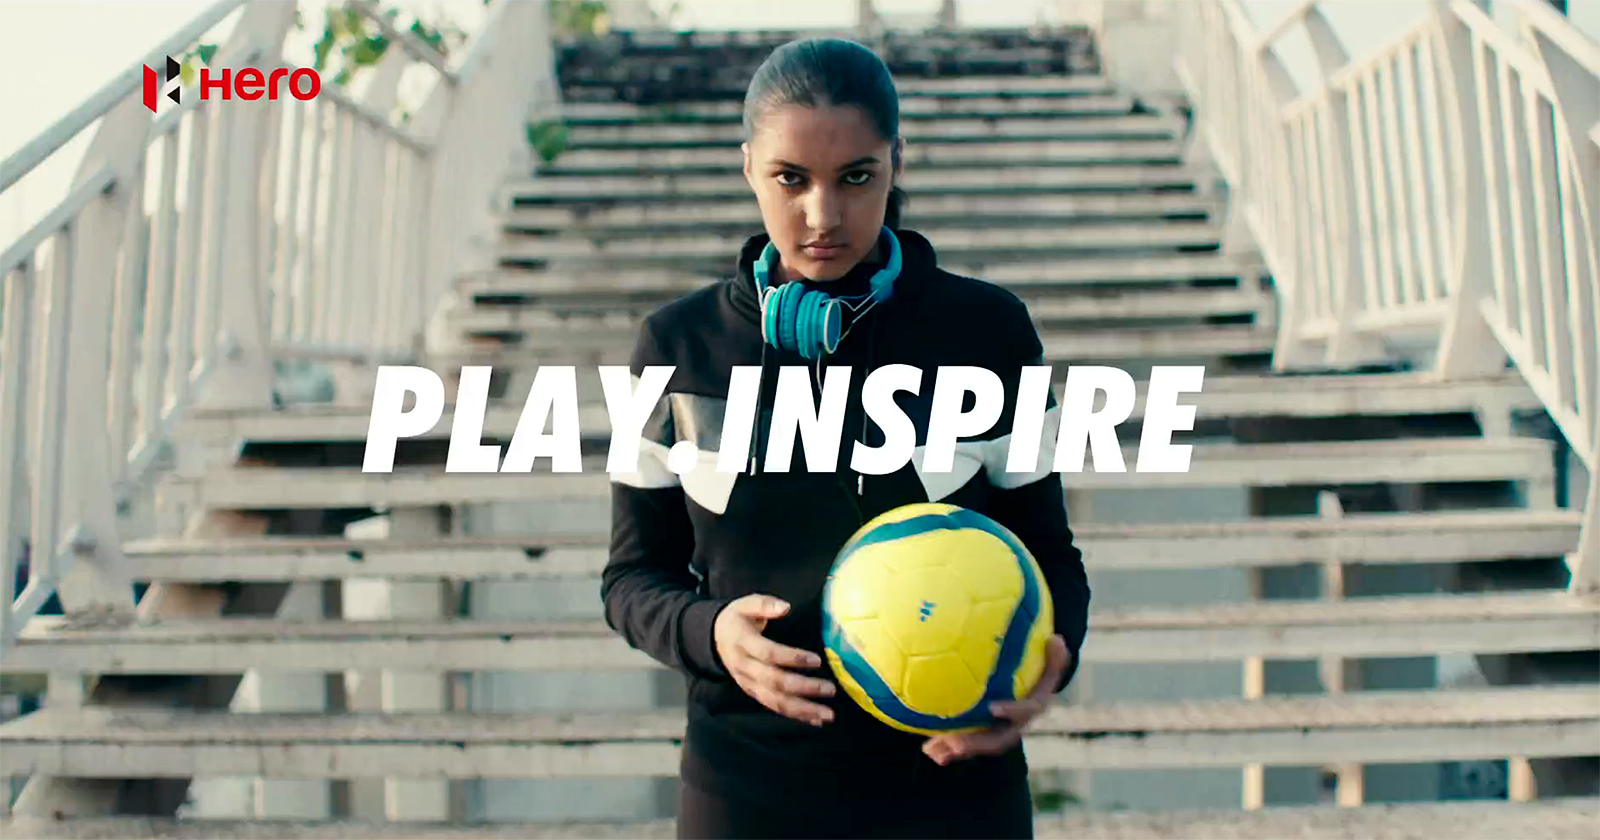 Hero MotoCorp #PlayInspire campaign for FIFA U-17 World Cup 2017